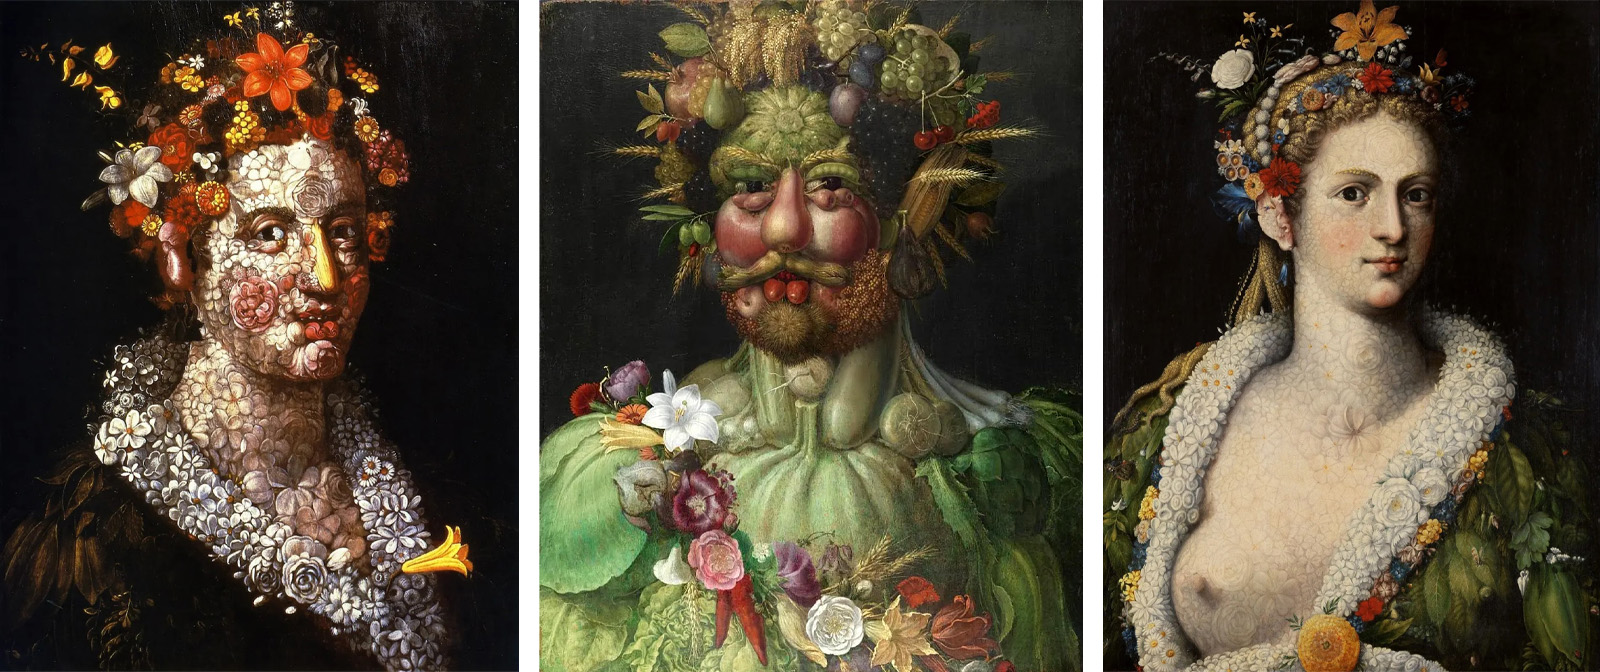 Why did Giuseppe Arcimboldo paint portraits of fruit and vegetables and why did people try to avoid the place where he lived?